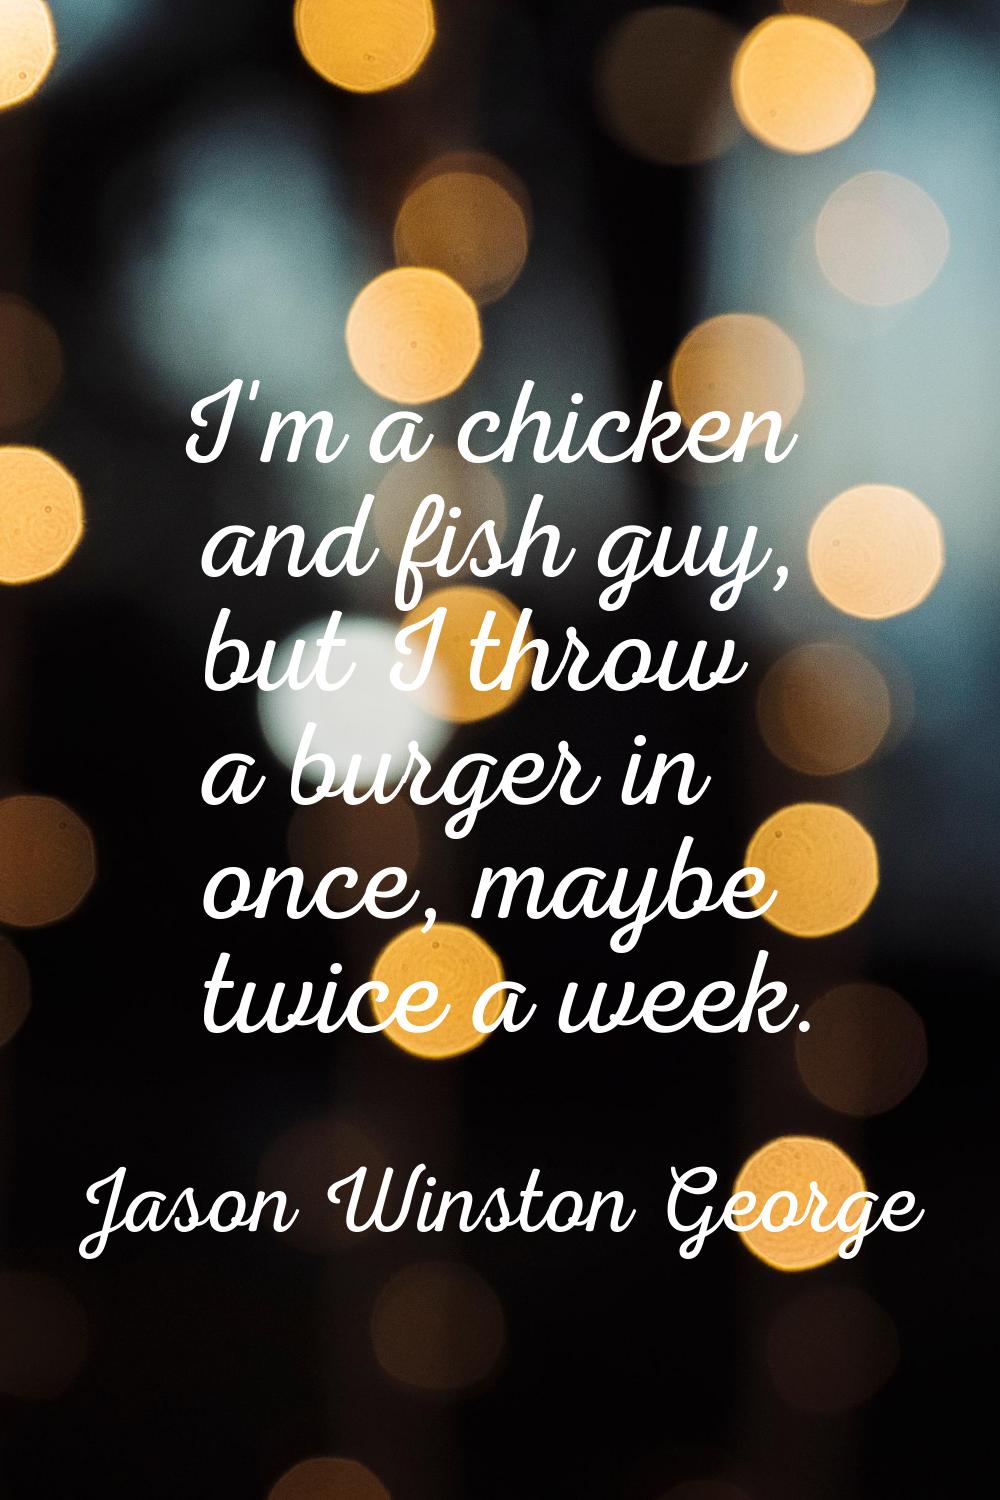 I'm a chicken and fish guy, but I throw a burger in once, maybe twice a week.